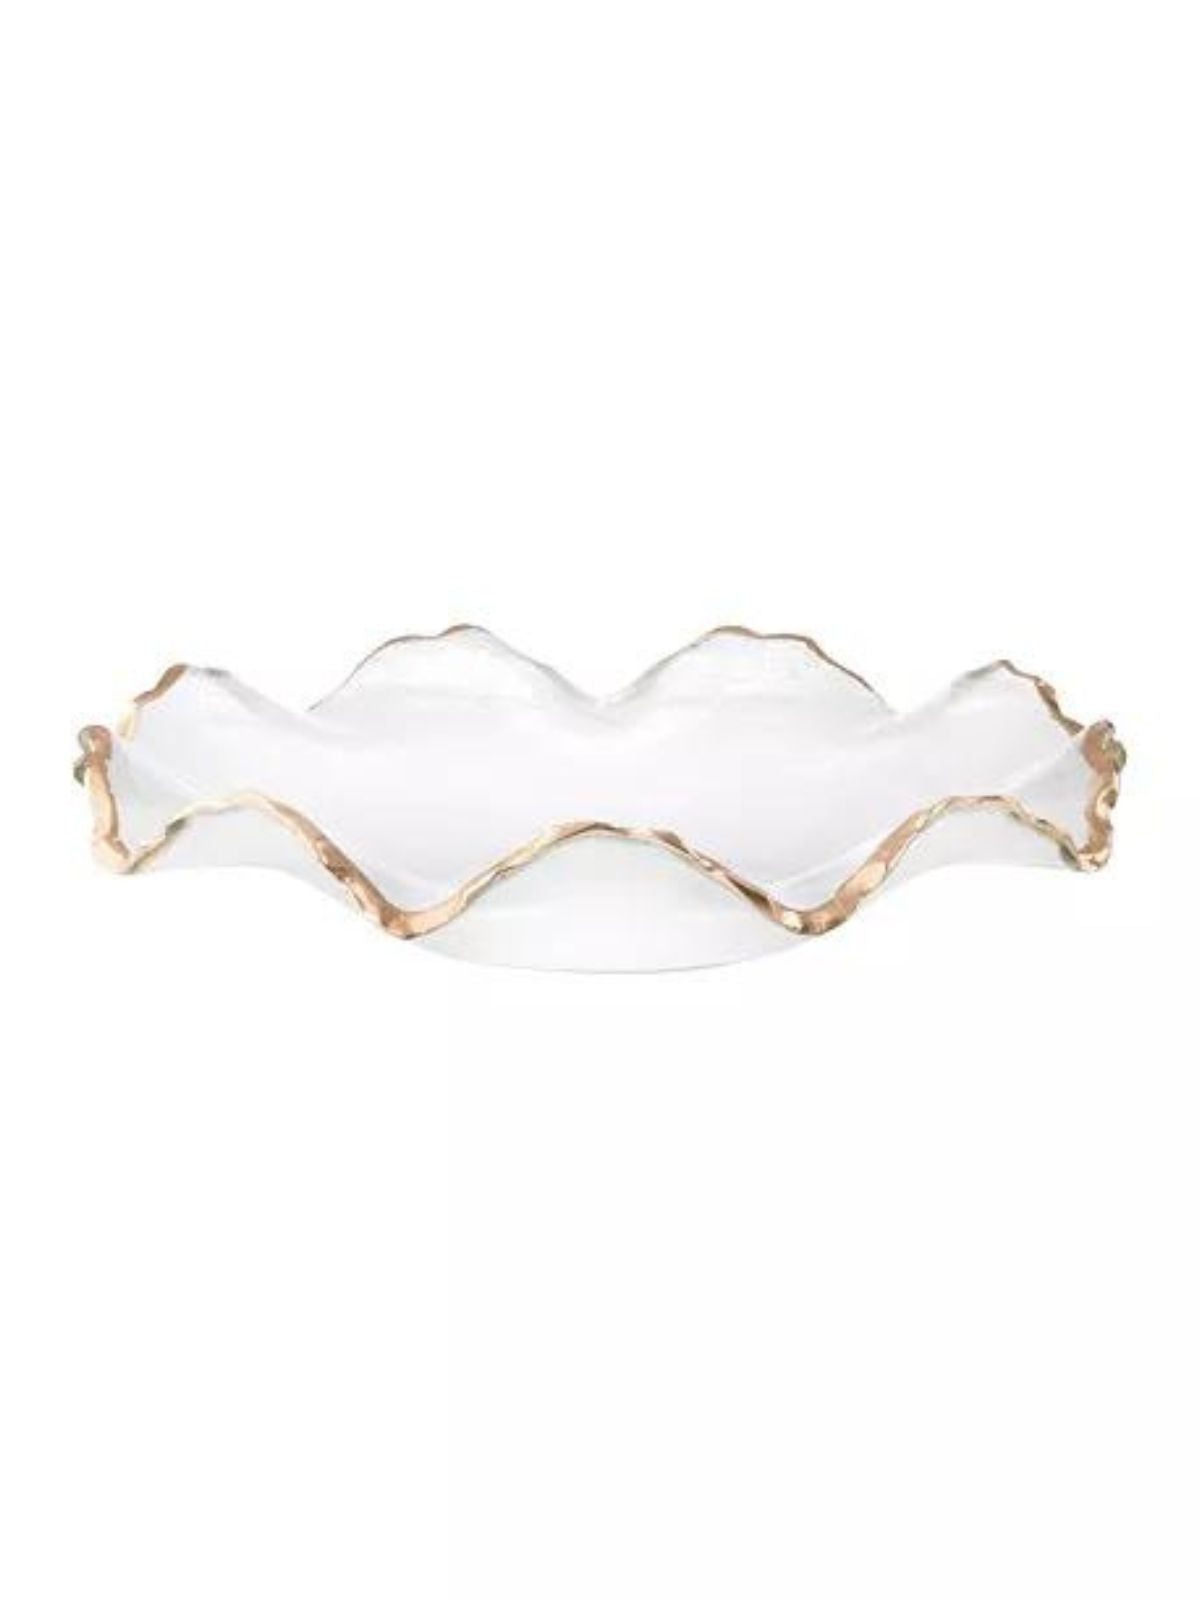 This luxurious 12D glass bowl is elegantly decorated with a ruffled design and gold-tone edge. Sold by KYA Home Decor